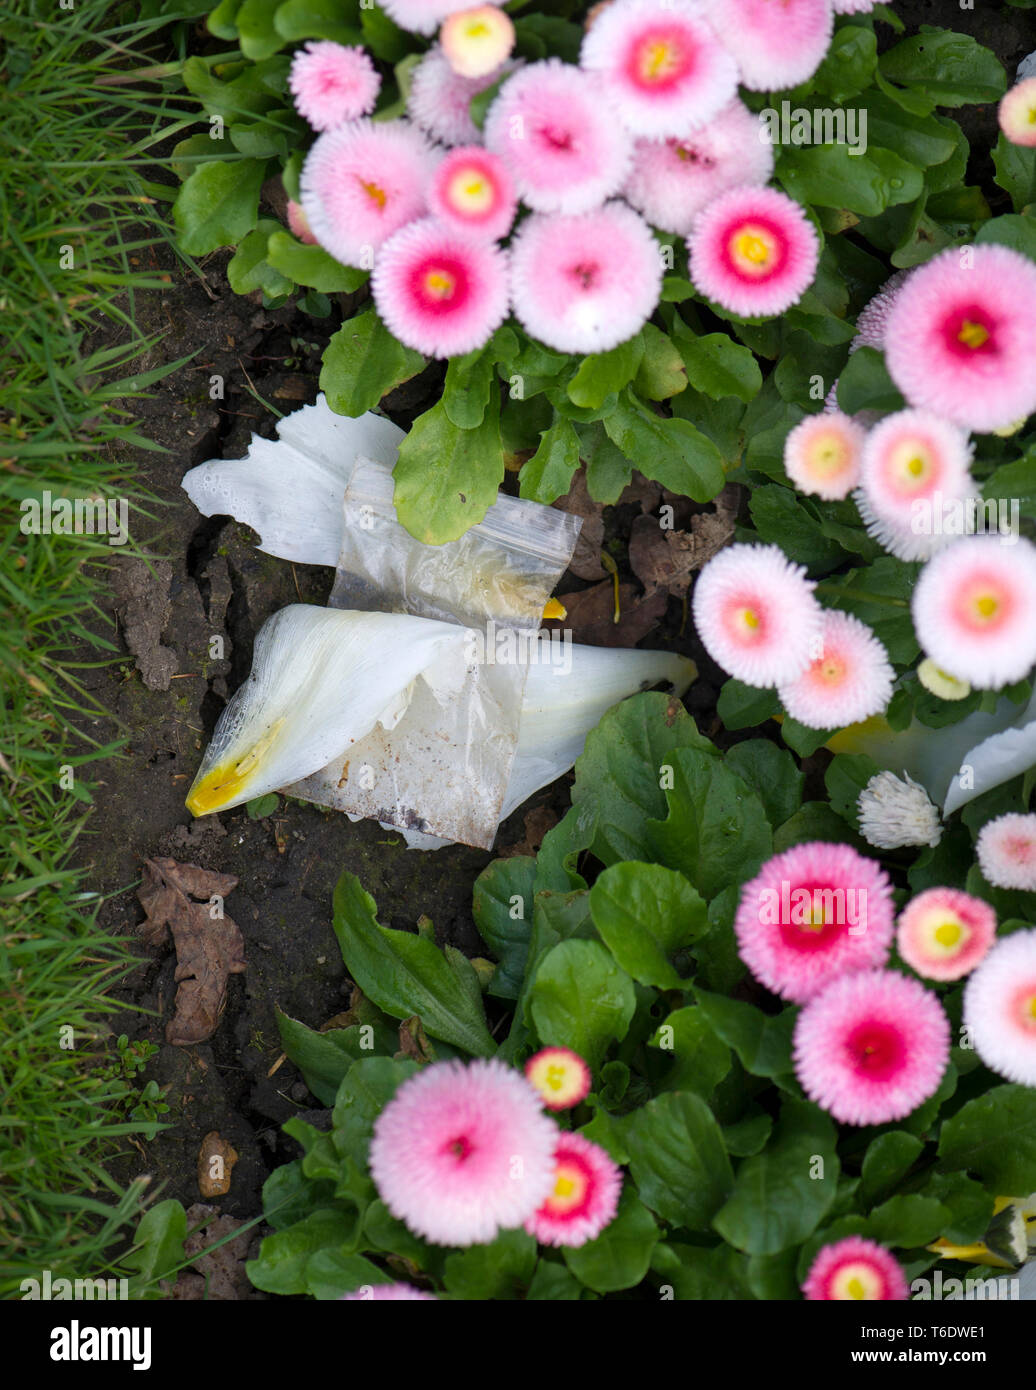 Discarded drug bags left in park Stock Photo